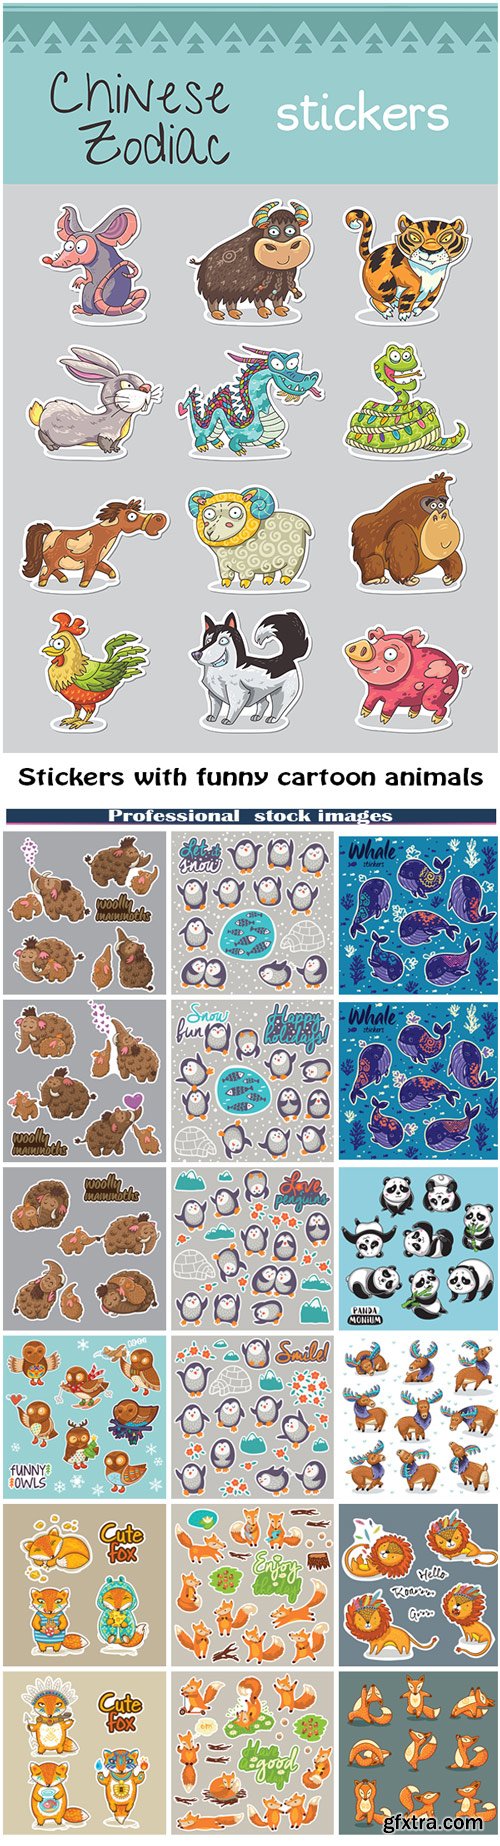 Collection of stickers with funny cartoon animals